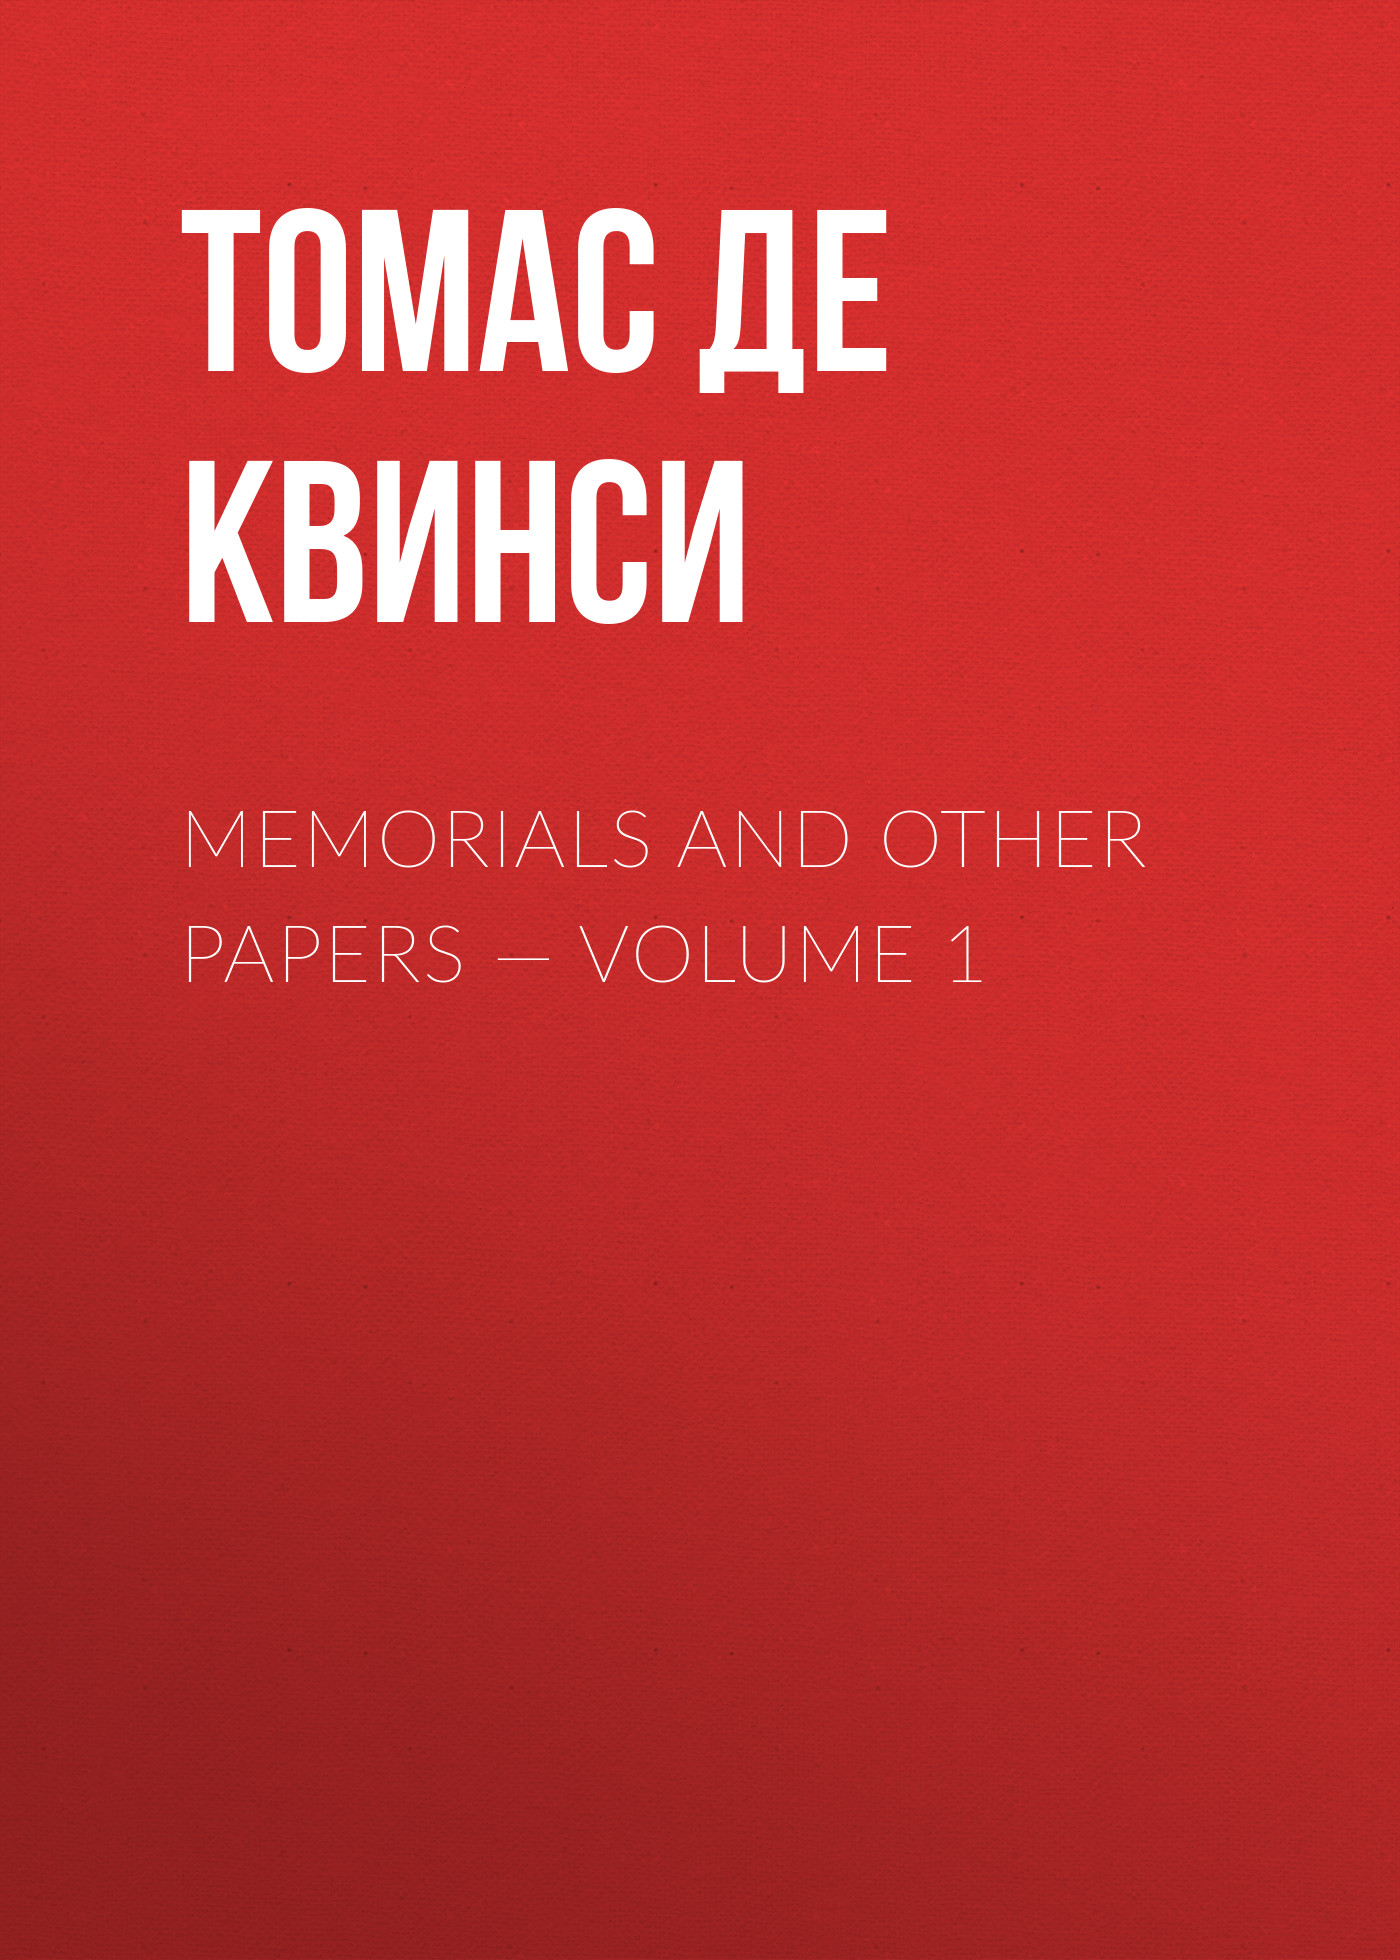 Memorials and Other Papers— Volume 1